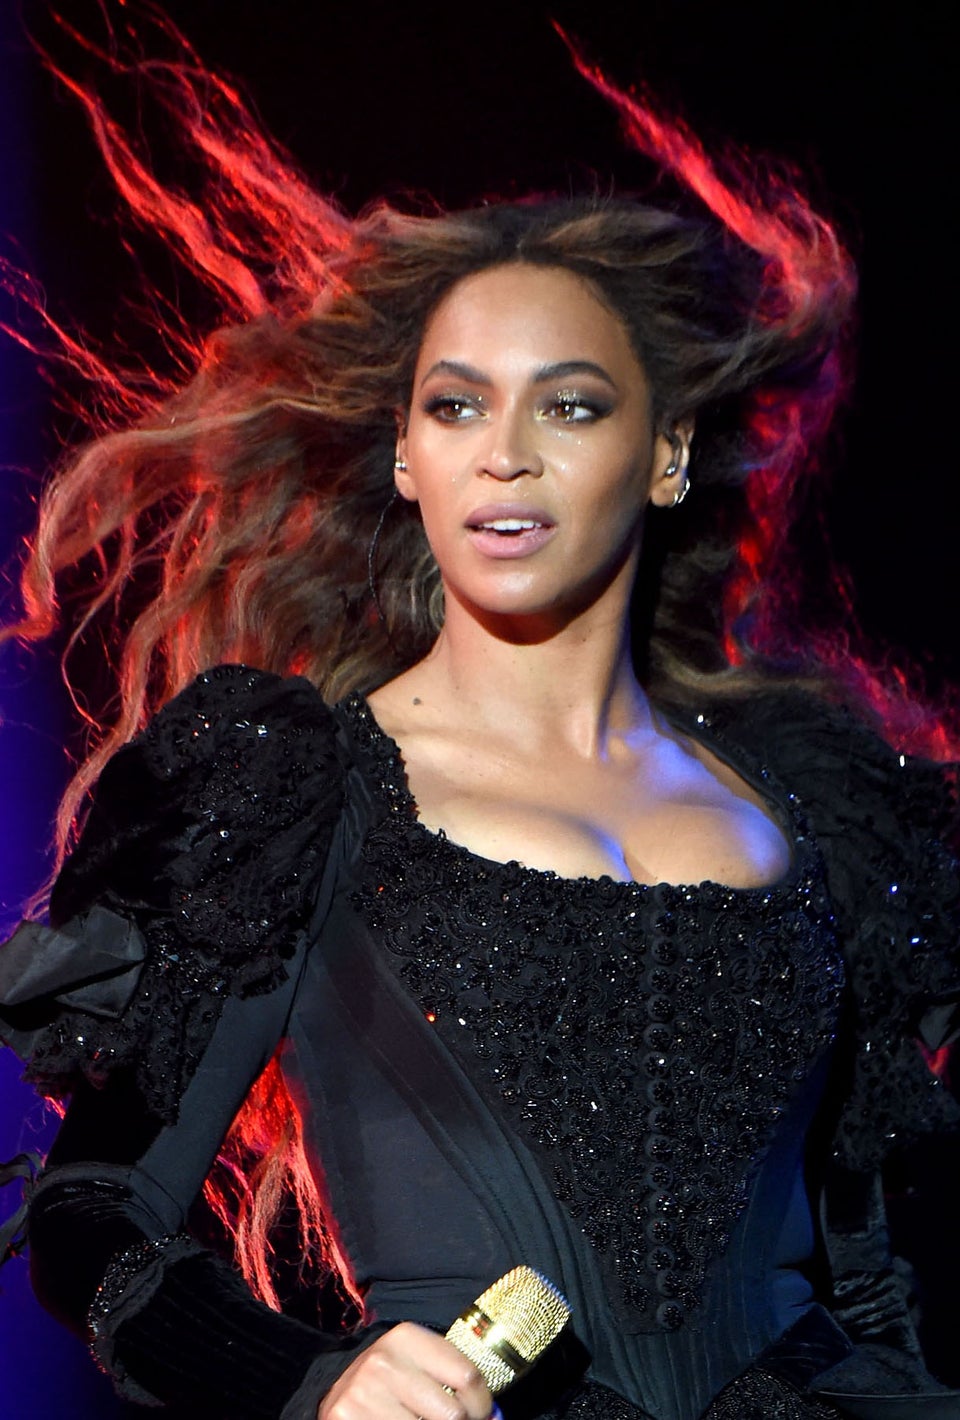 See Evelyn from the Internets’ Reaction to Beyoncé Playing Her Video on Tour